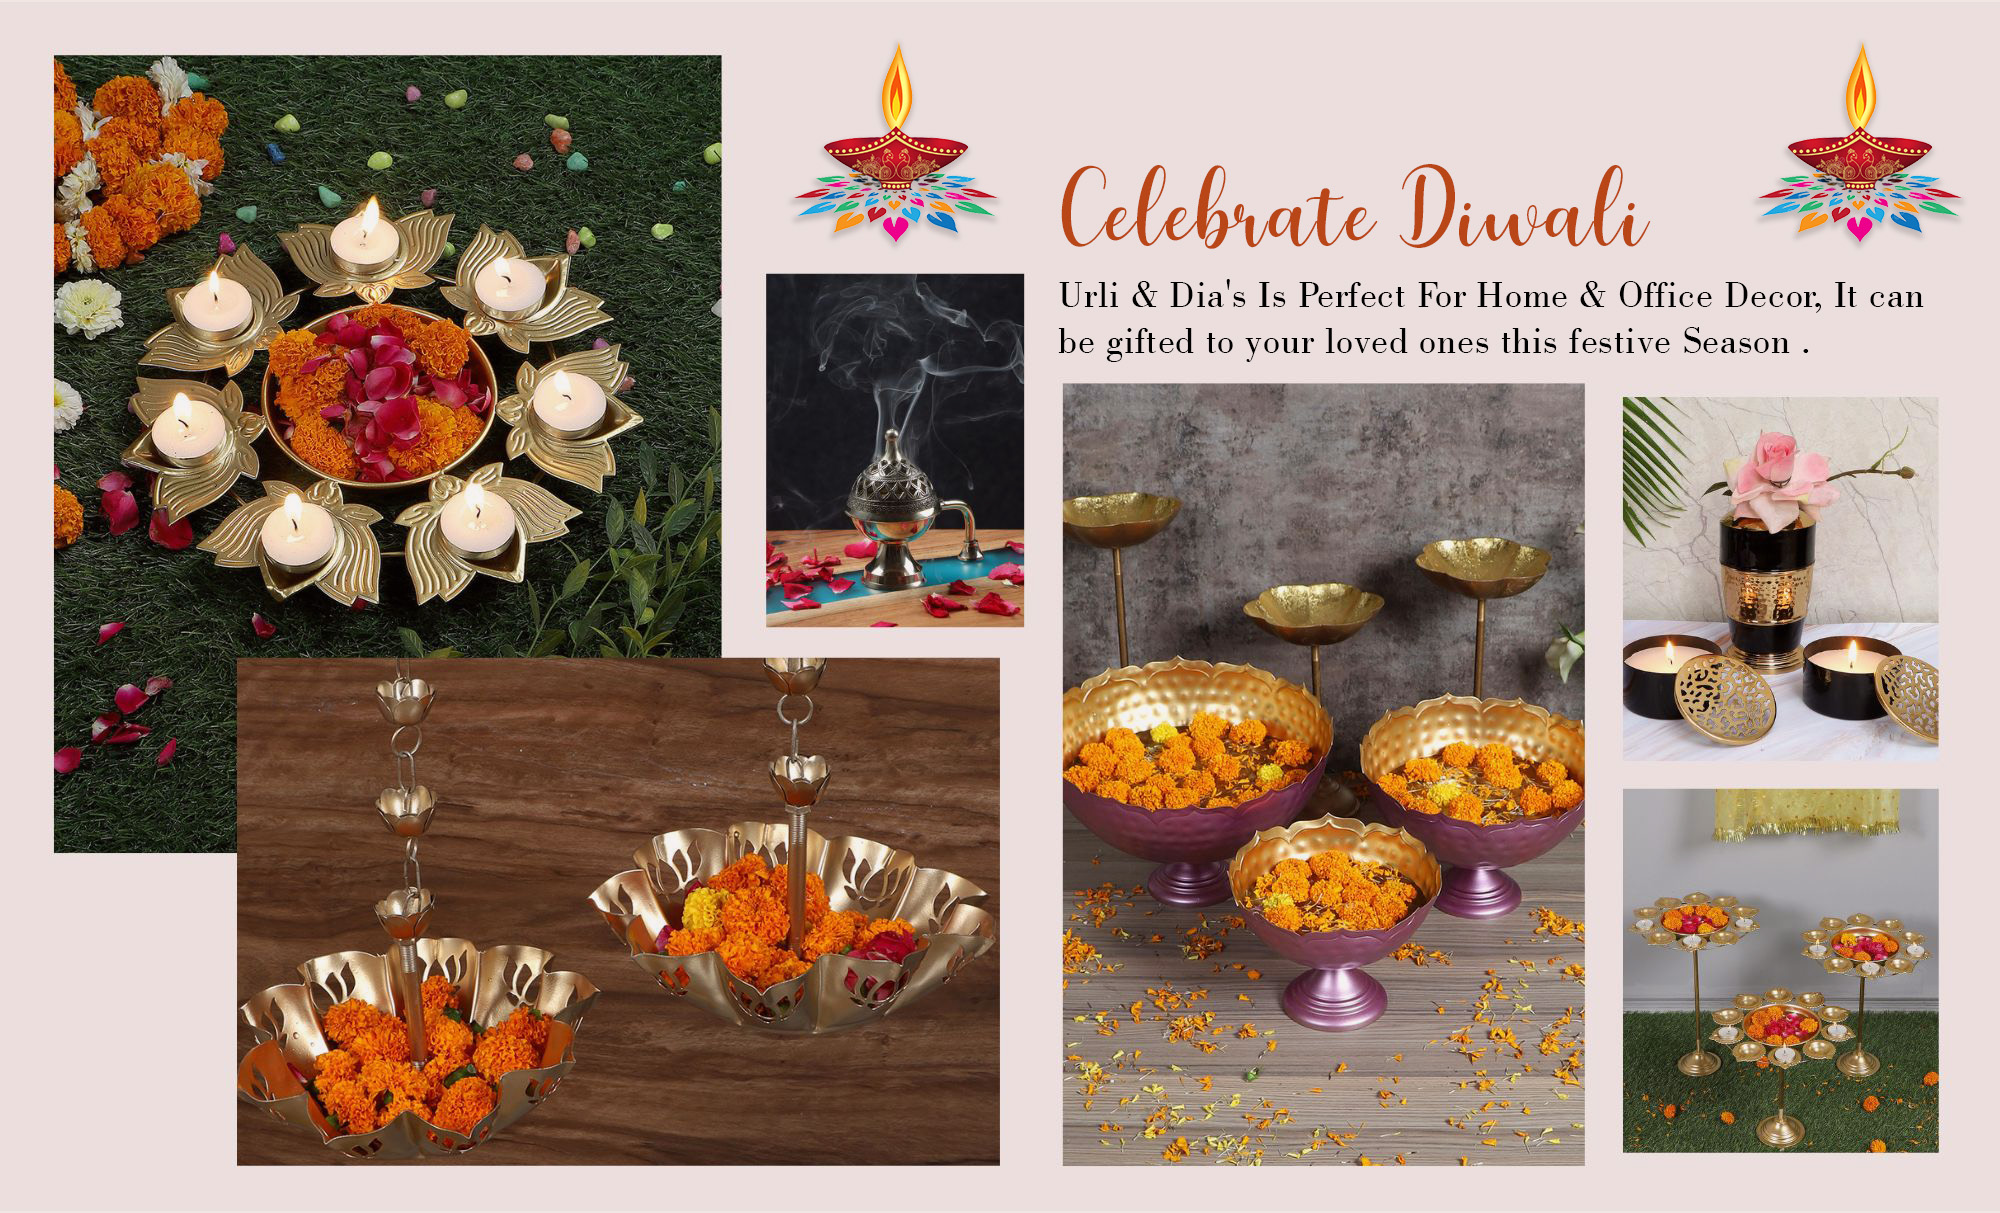 Celebrate Diwali in Style with these 5 Premium and Luxury Gift Ideas